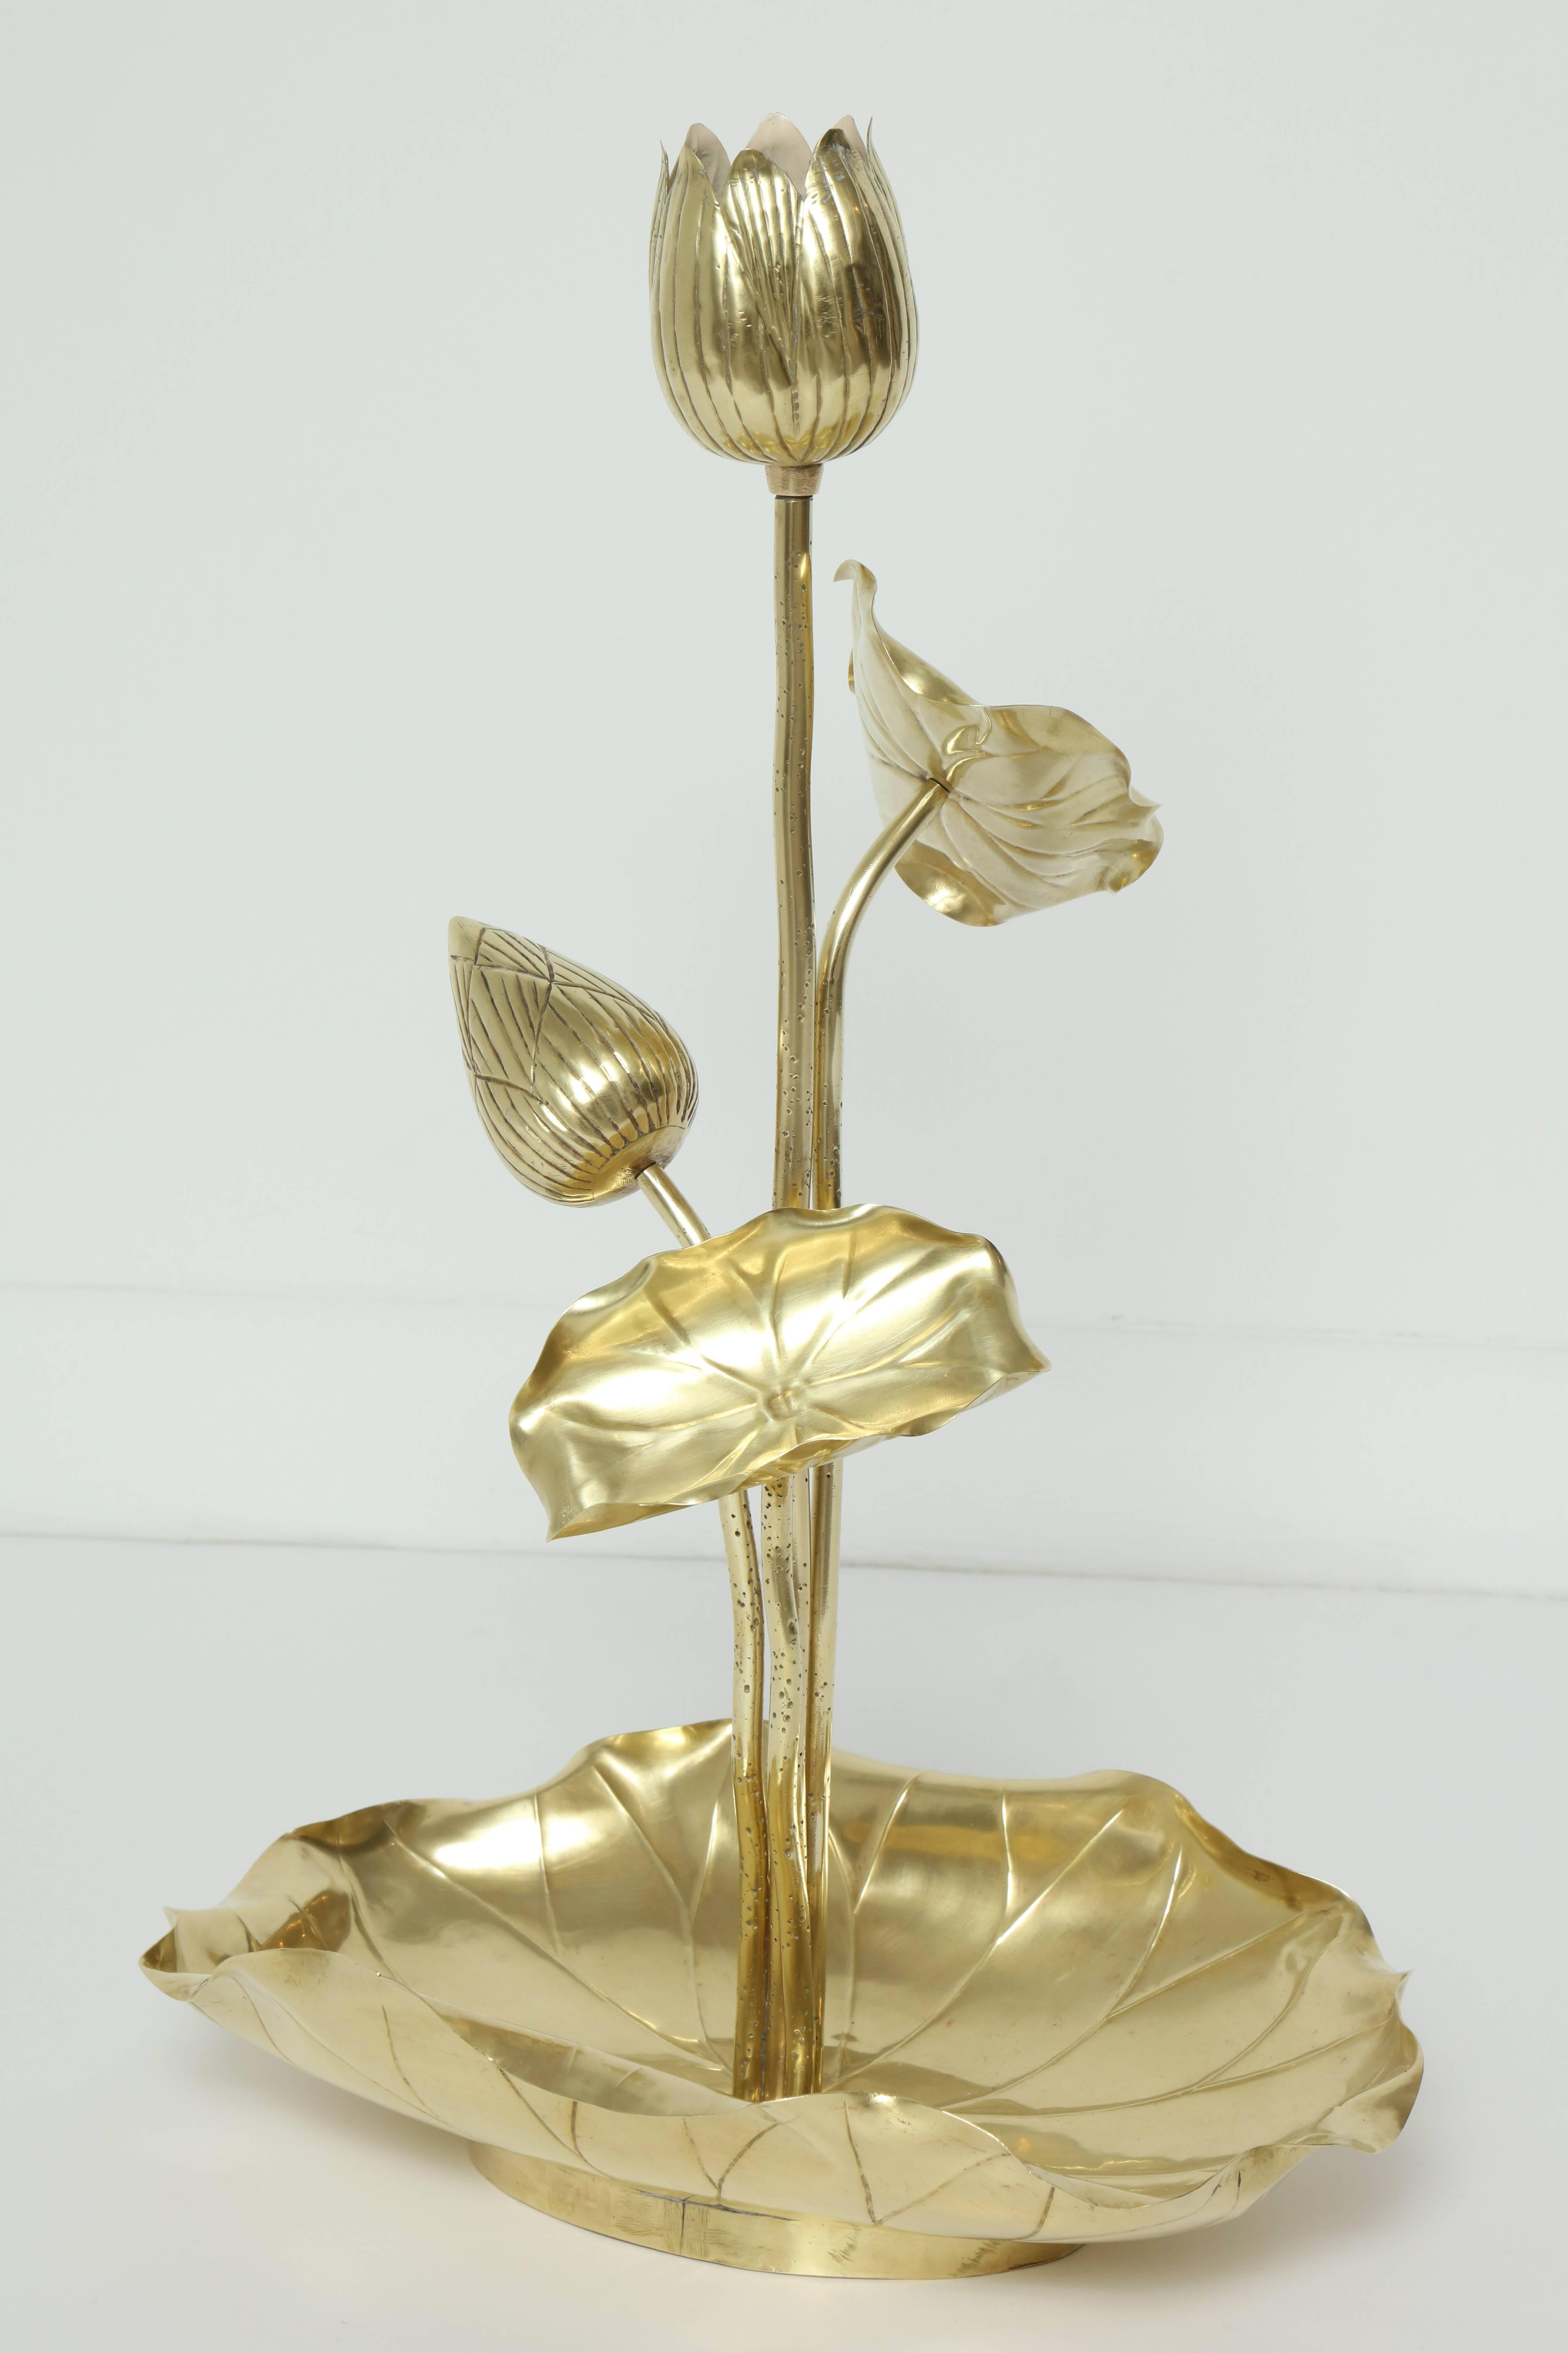 Decorative brass water lilies as a bowl or just as a beautiful sculpture, circa 1950, Italy.